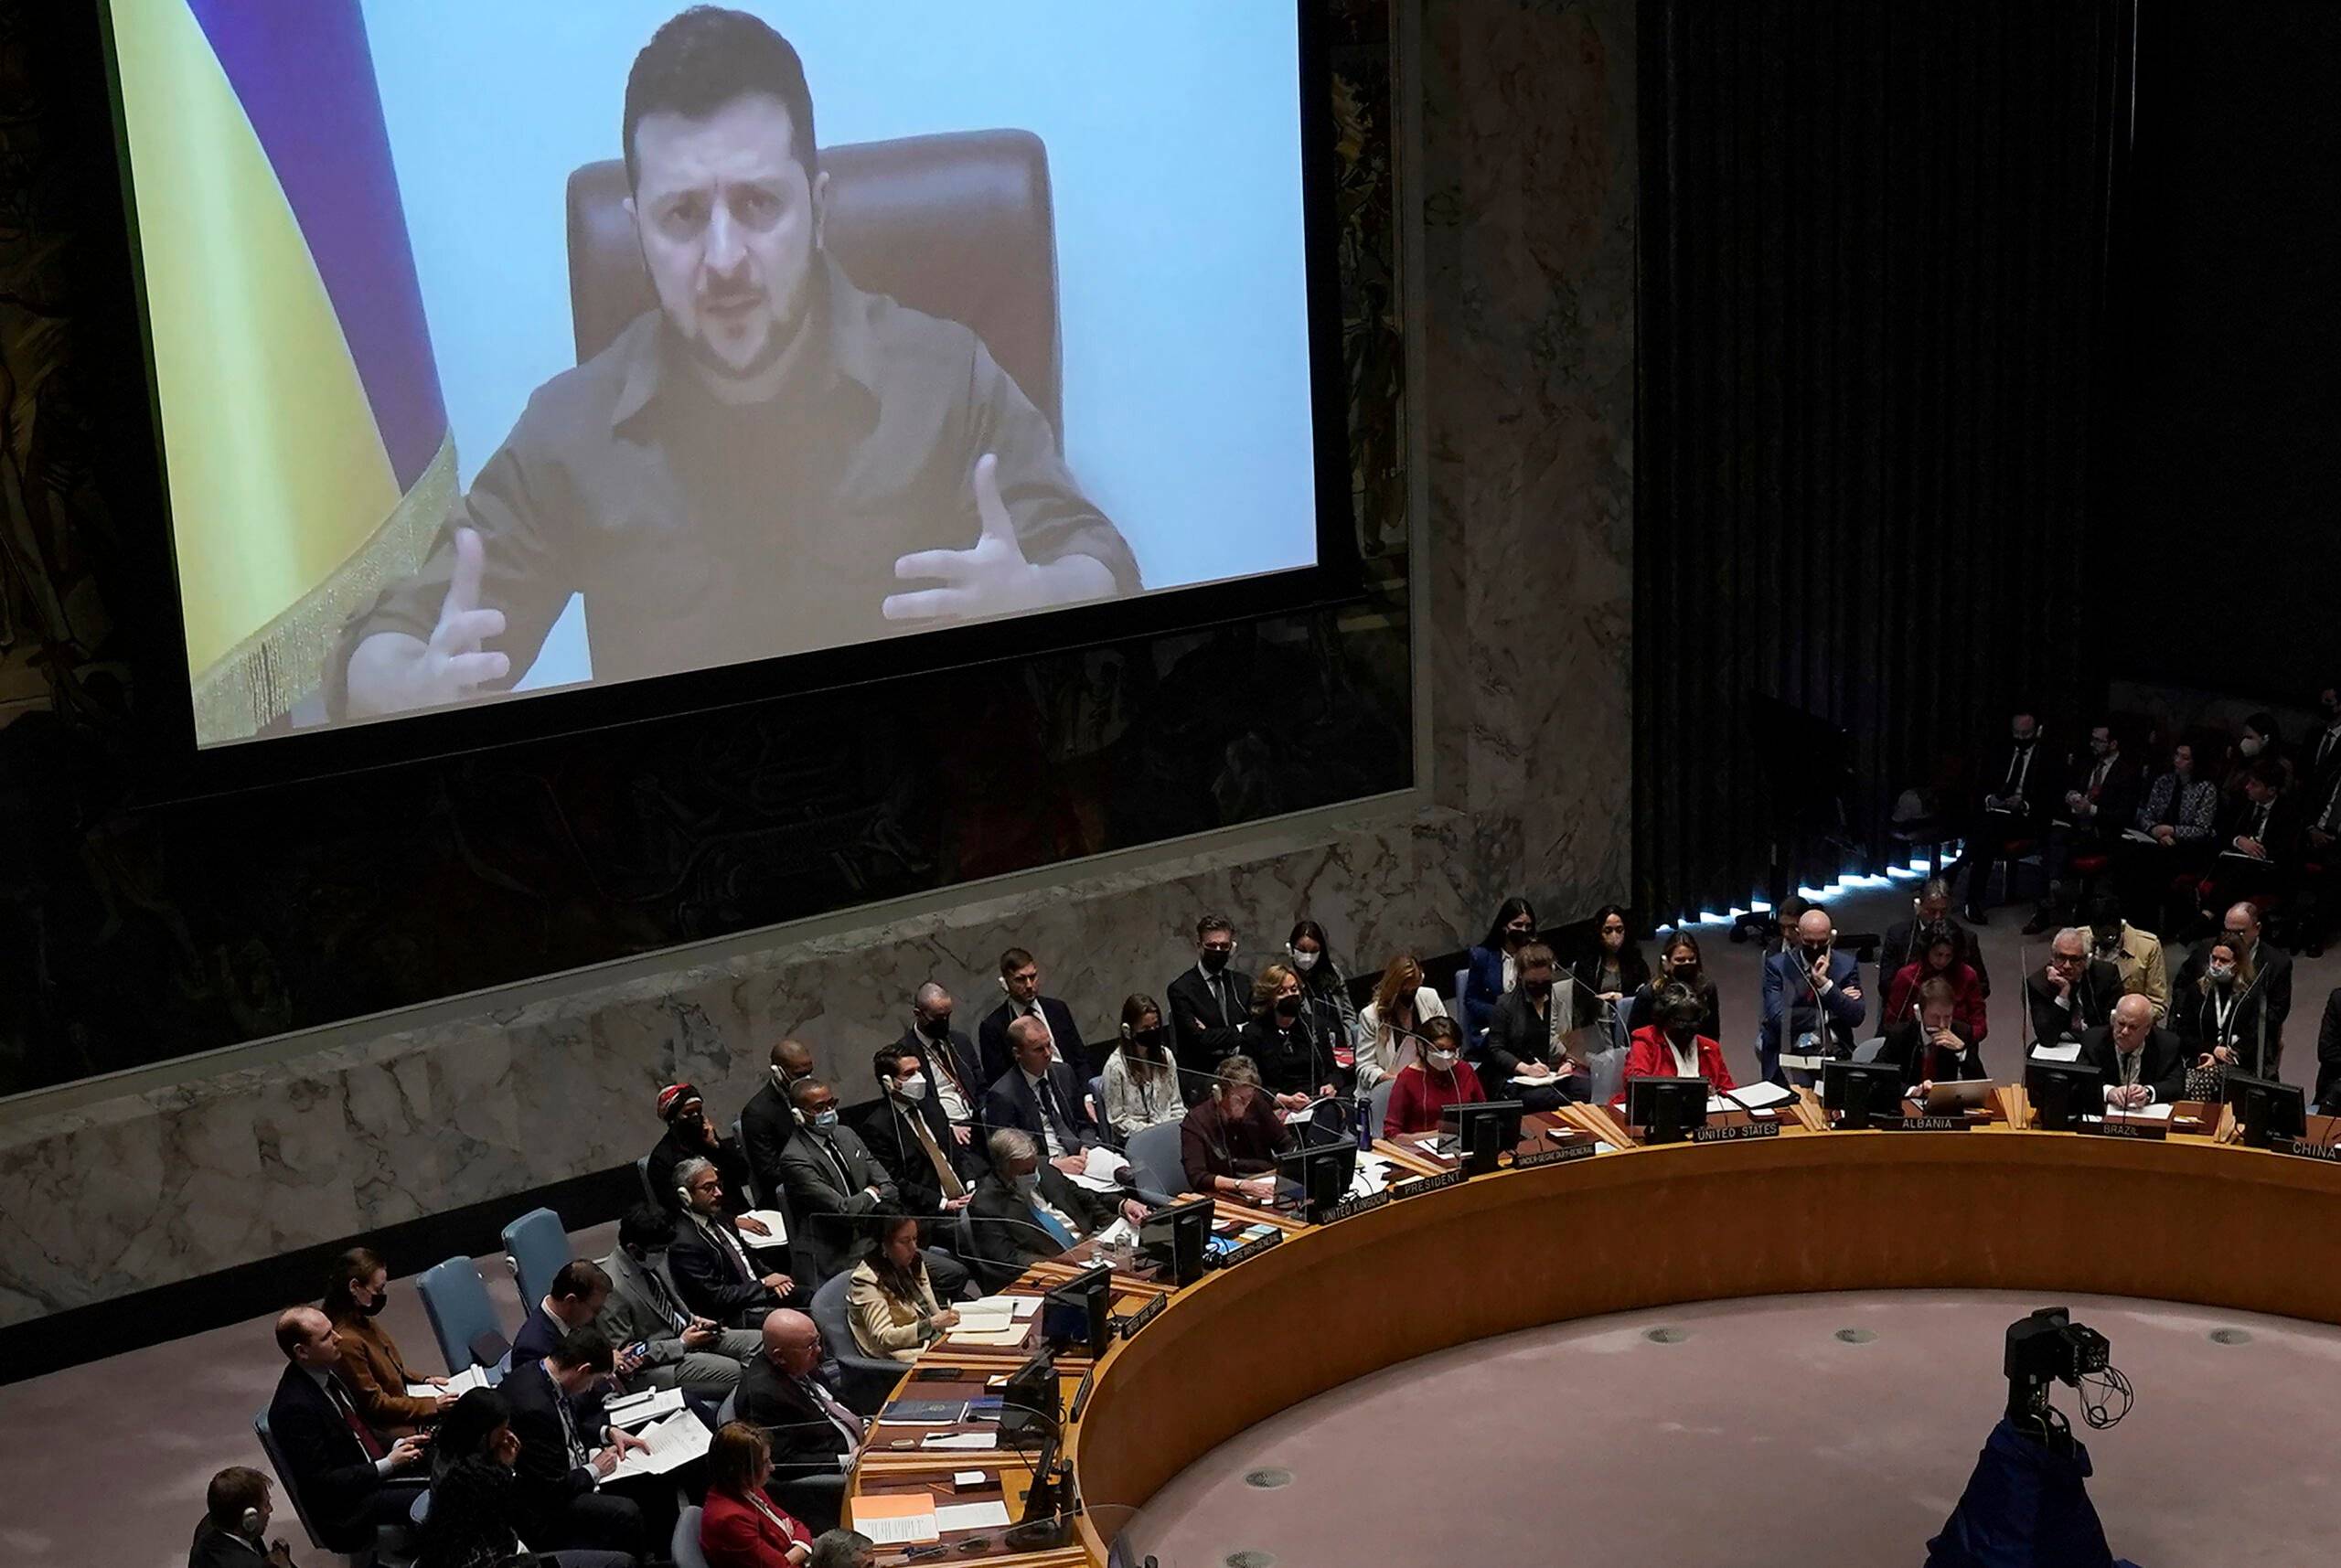 President Volodymyr Zelensky, of Ukraine, addresses a meeting of the United Nations Security Council in New York City on April 5, 2022. - Zelensky challenged the United Nations to "act immediately" or "dissolve yourself altogether" during a blistering address in which he showed a harrowing video of dead bodies -- including children -- he said were victims of Russian atrocities. (Photo by TIMOTHY A. CLARY / AFP)